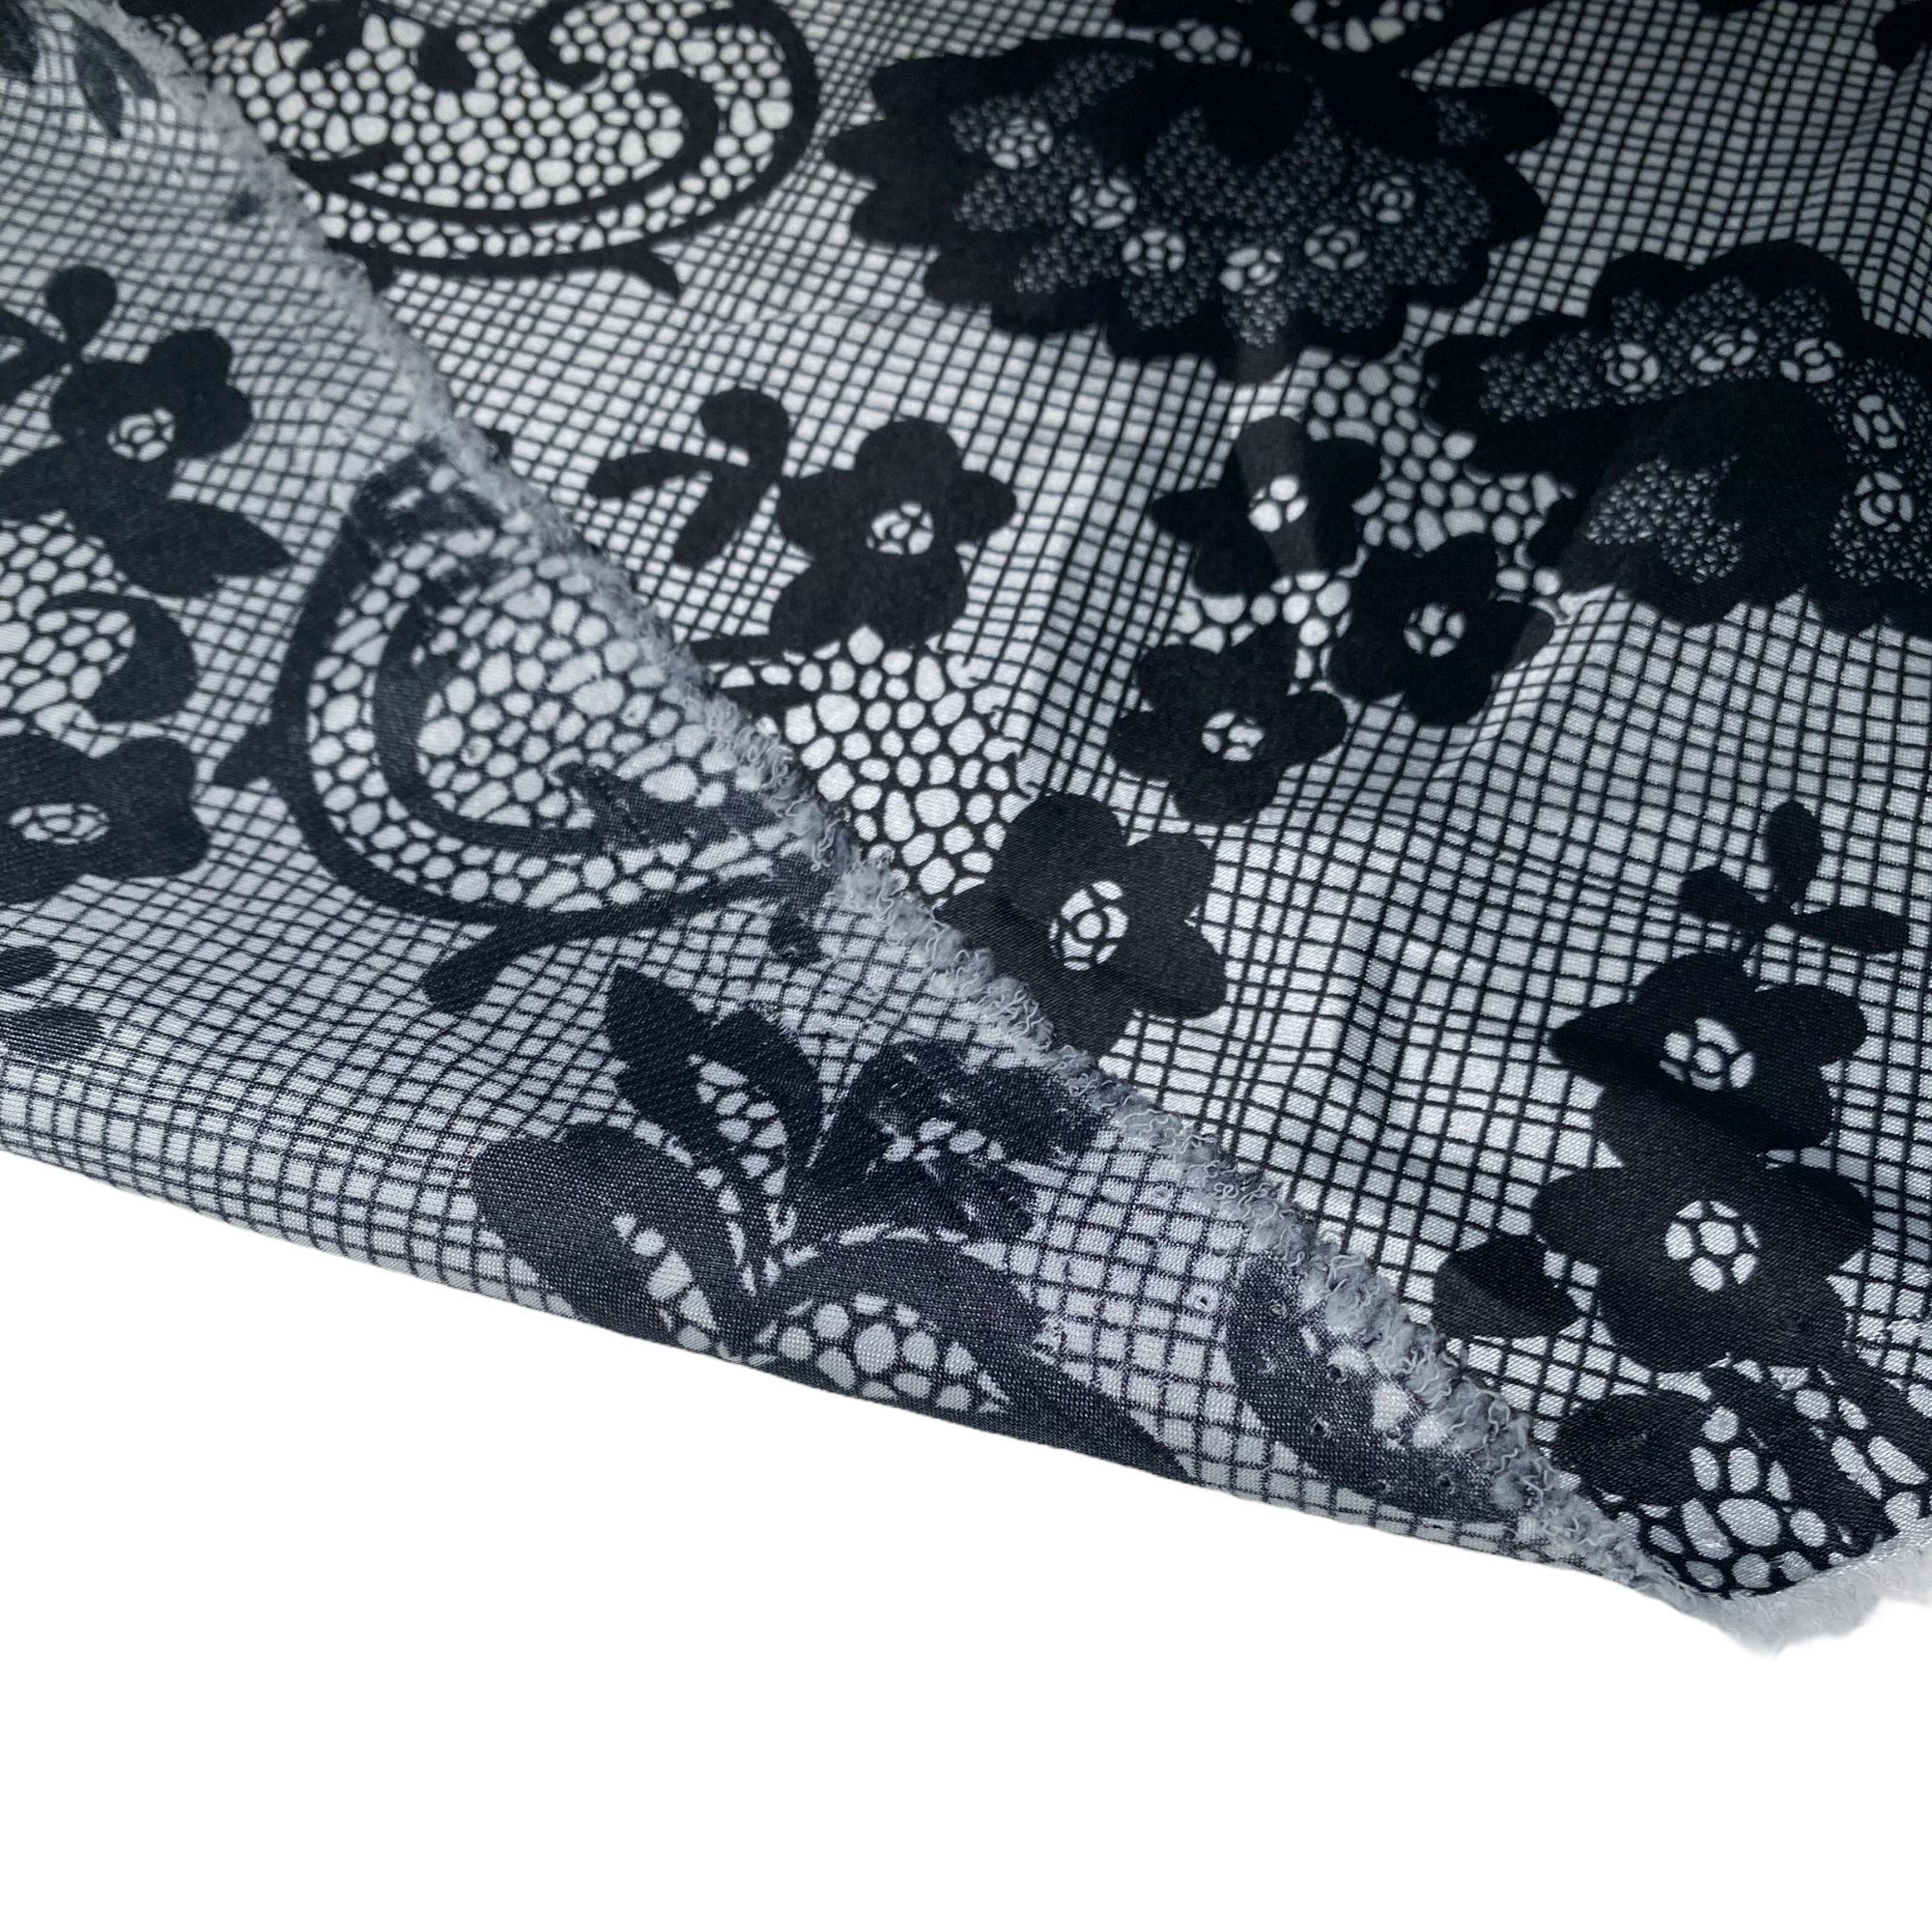 Printed Polyester Charmeuse - Floral Lace Print - White/Black